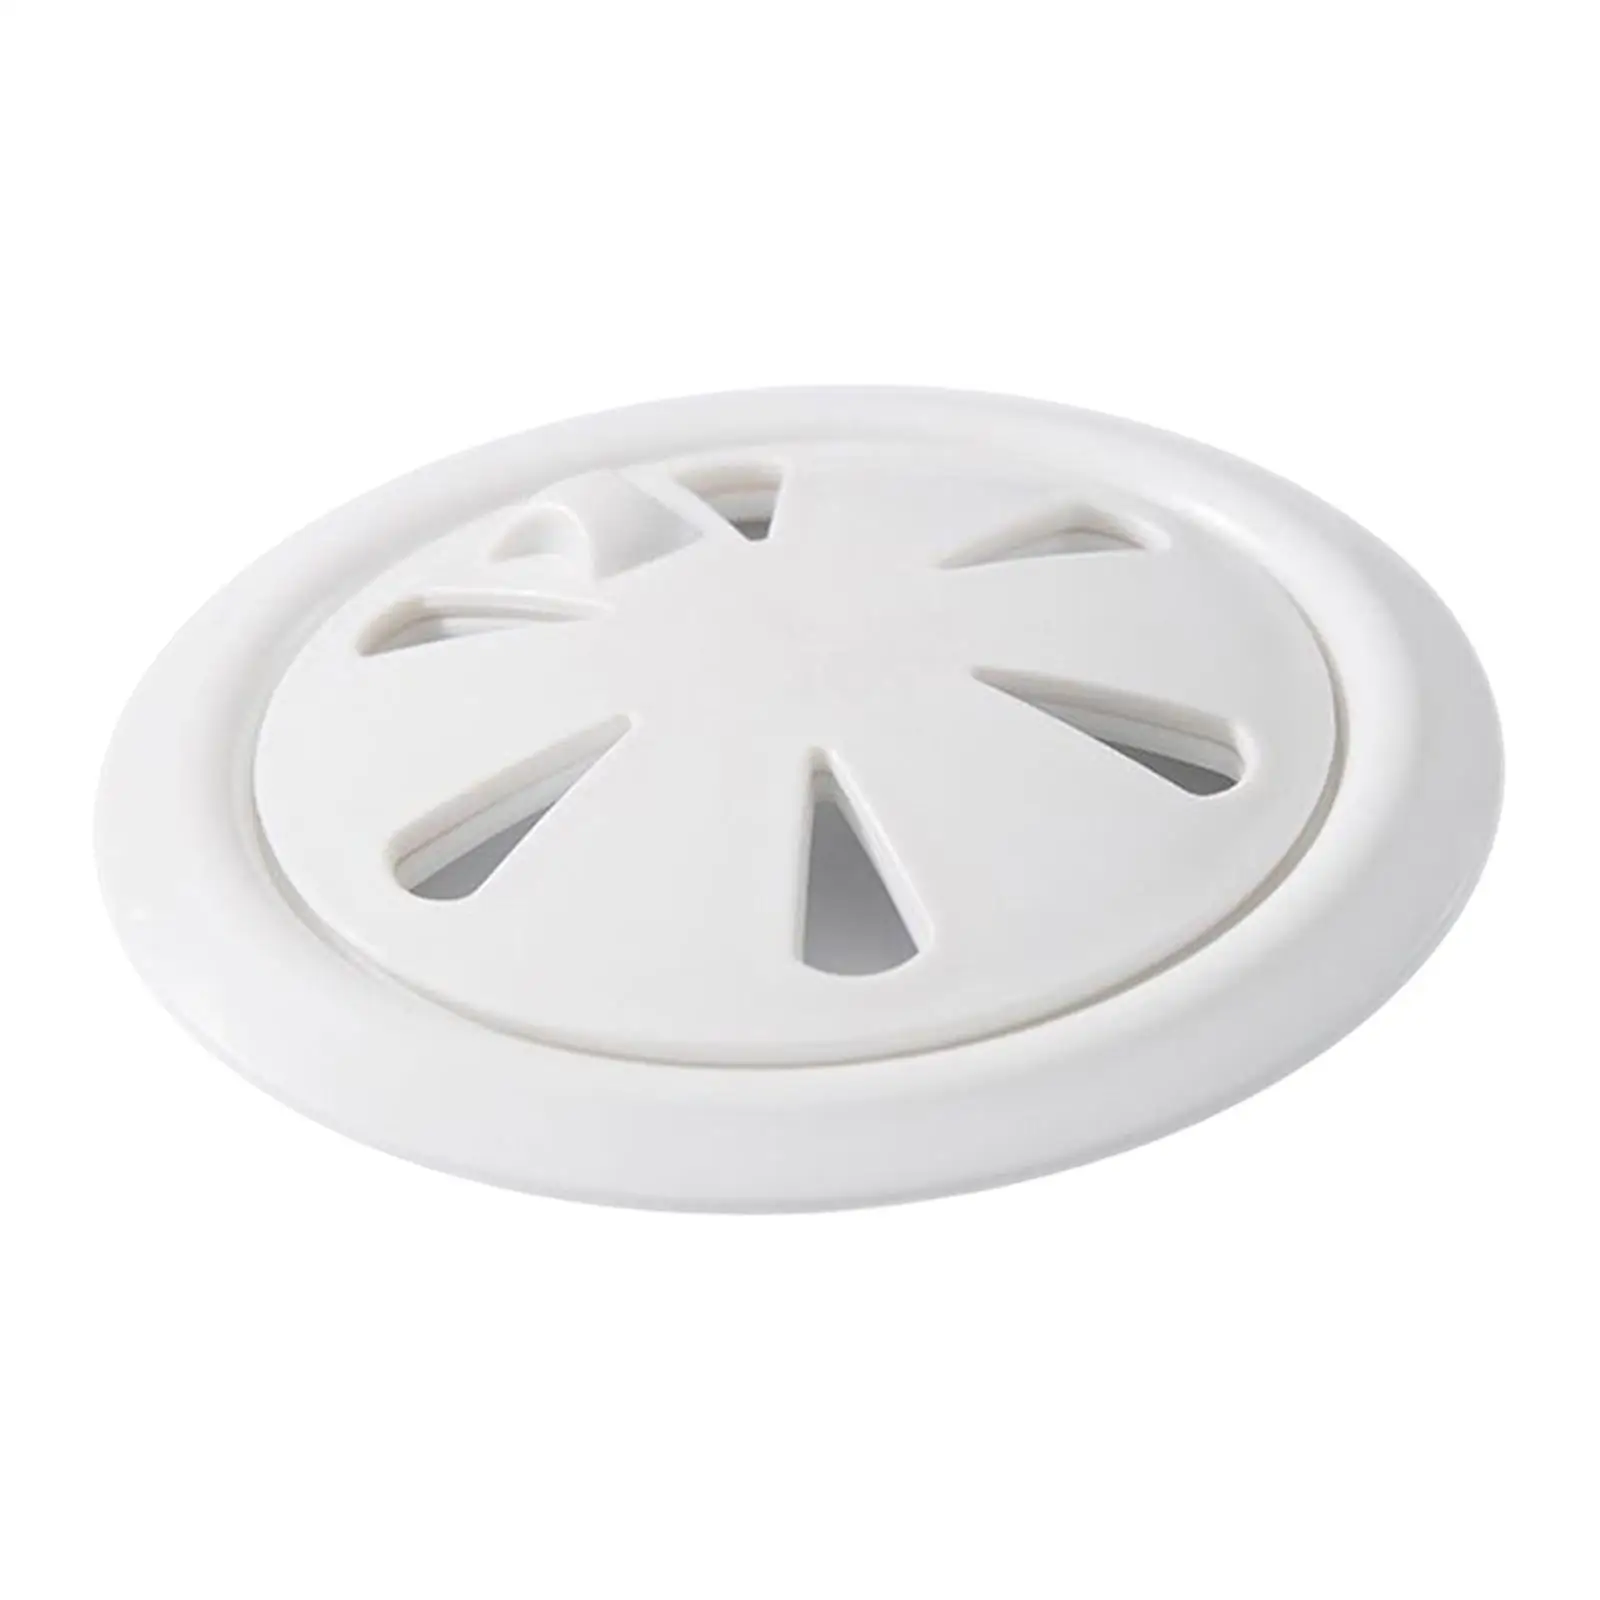 Shower Drain Catcher Round Easy Suction Cup PP Flat Strainer Filter Stopper for Sink Bathtub